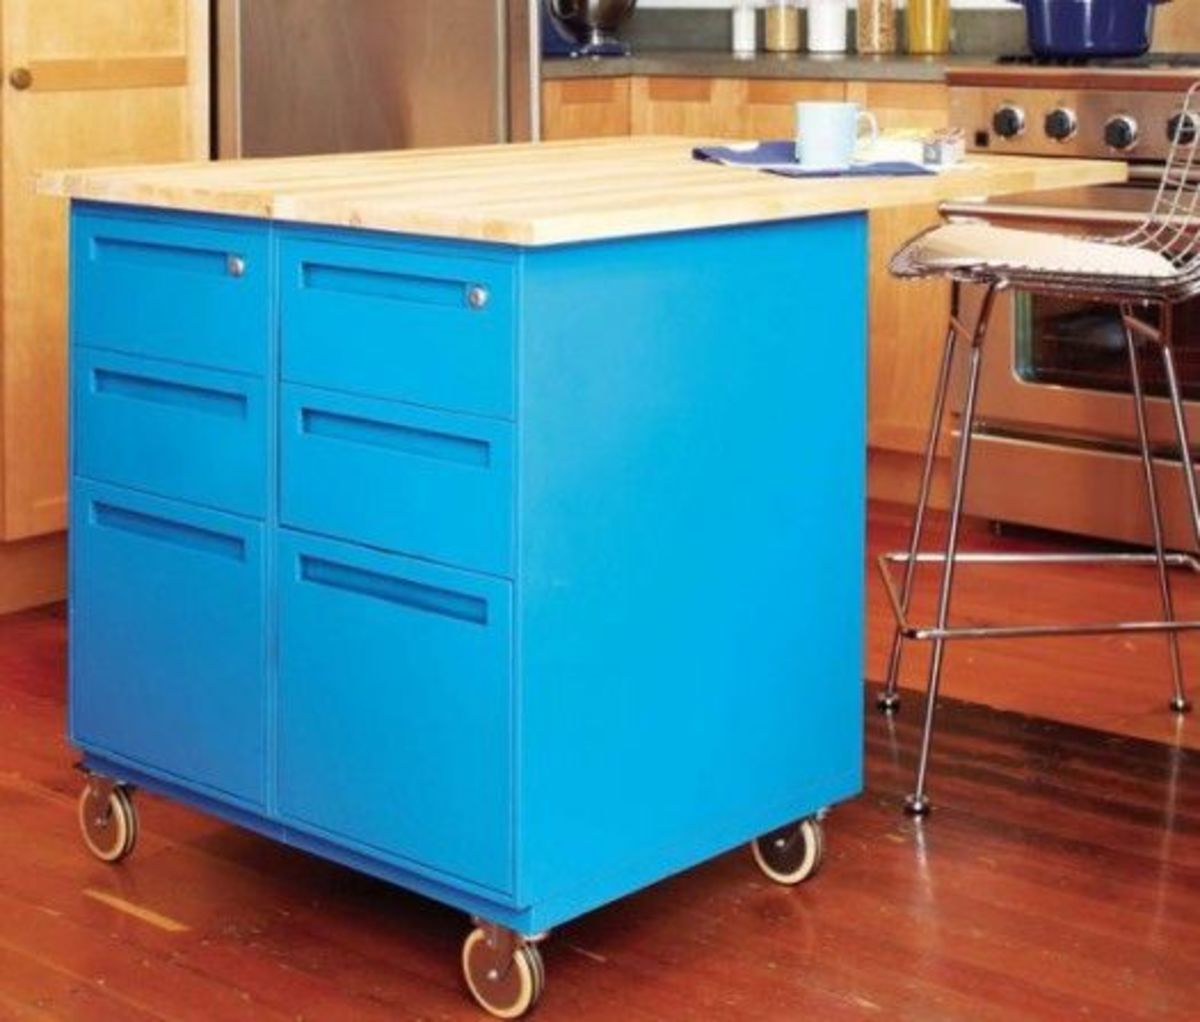 Paint can turn a drab old filing cabinet into a trendy kitchen island.